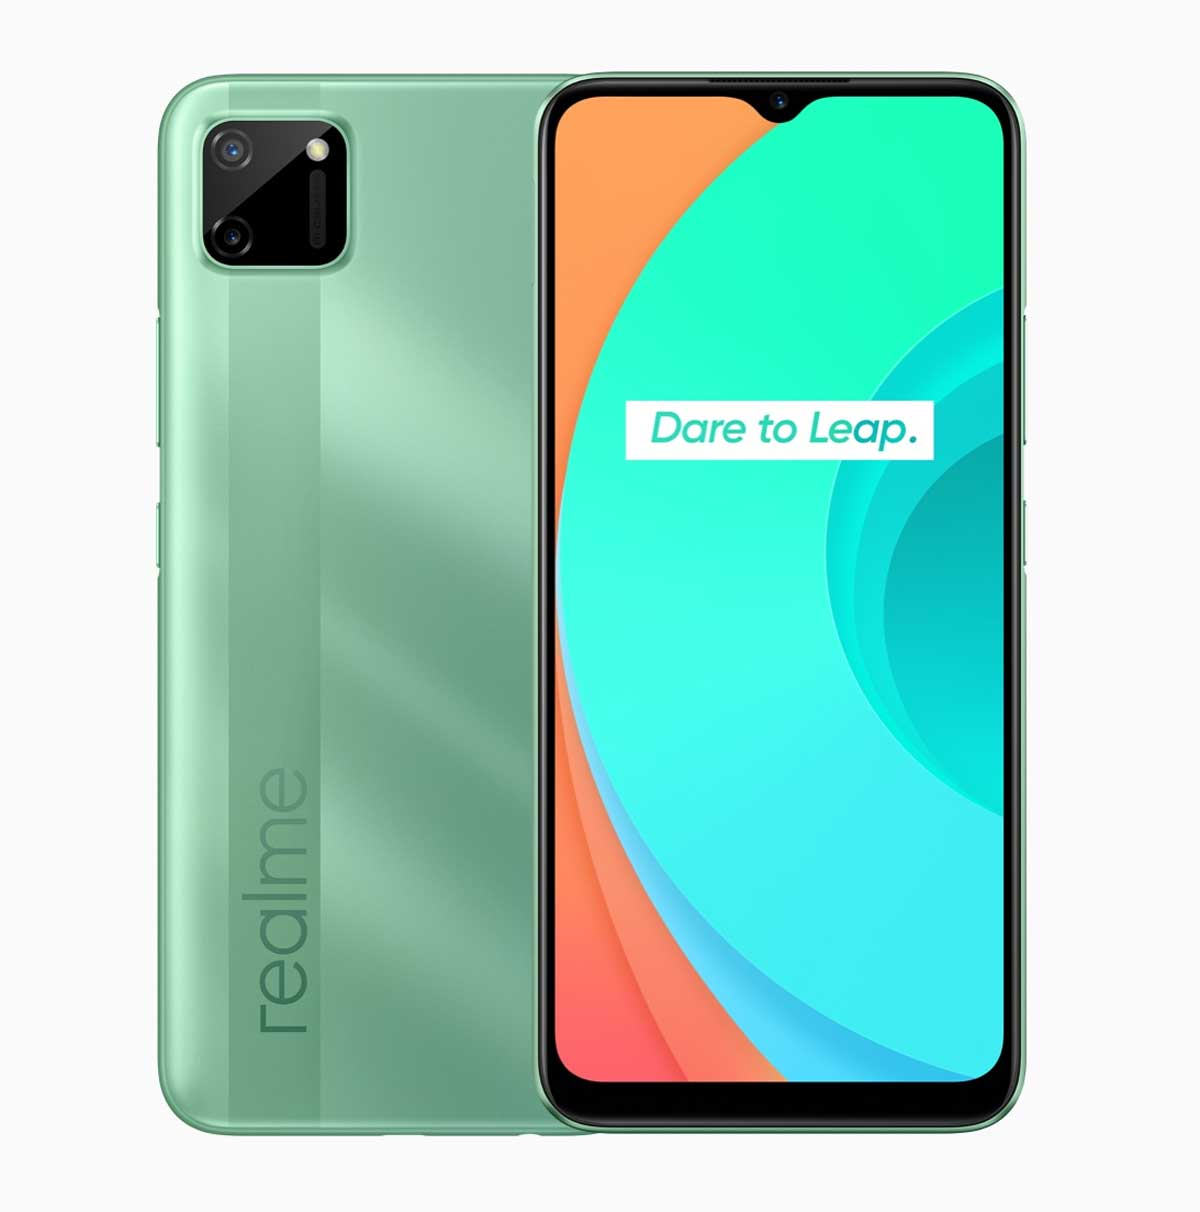 realme c11 specification & review